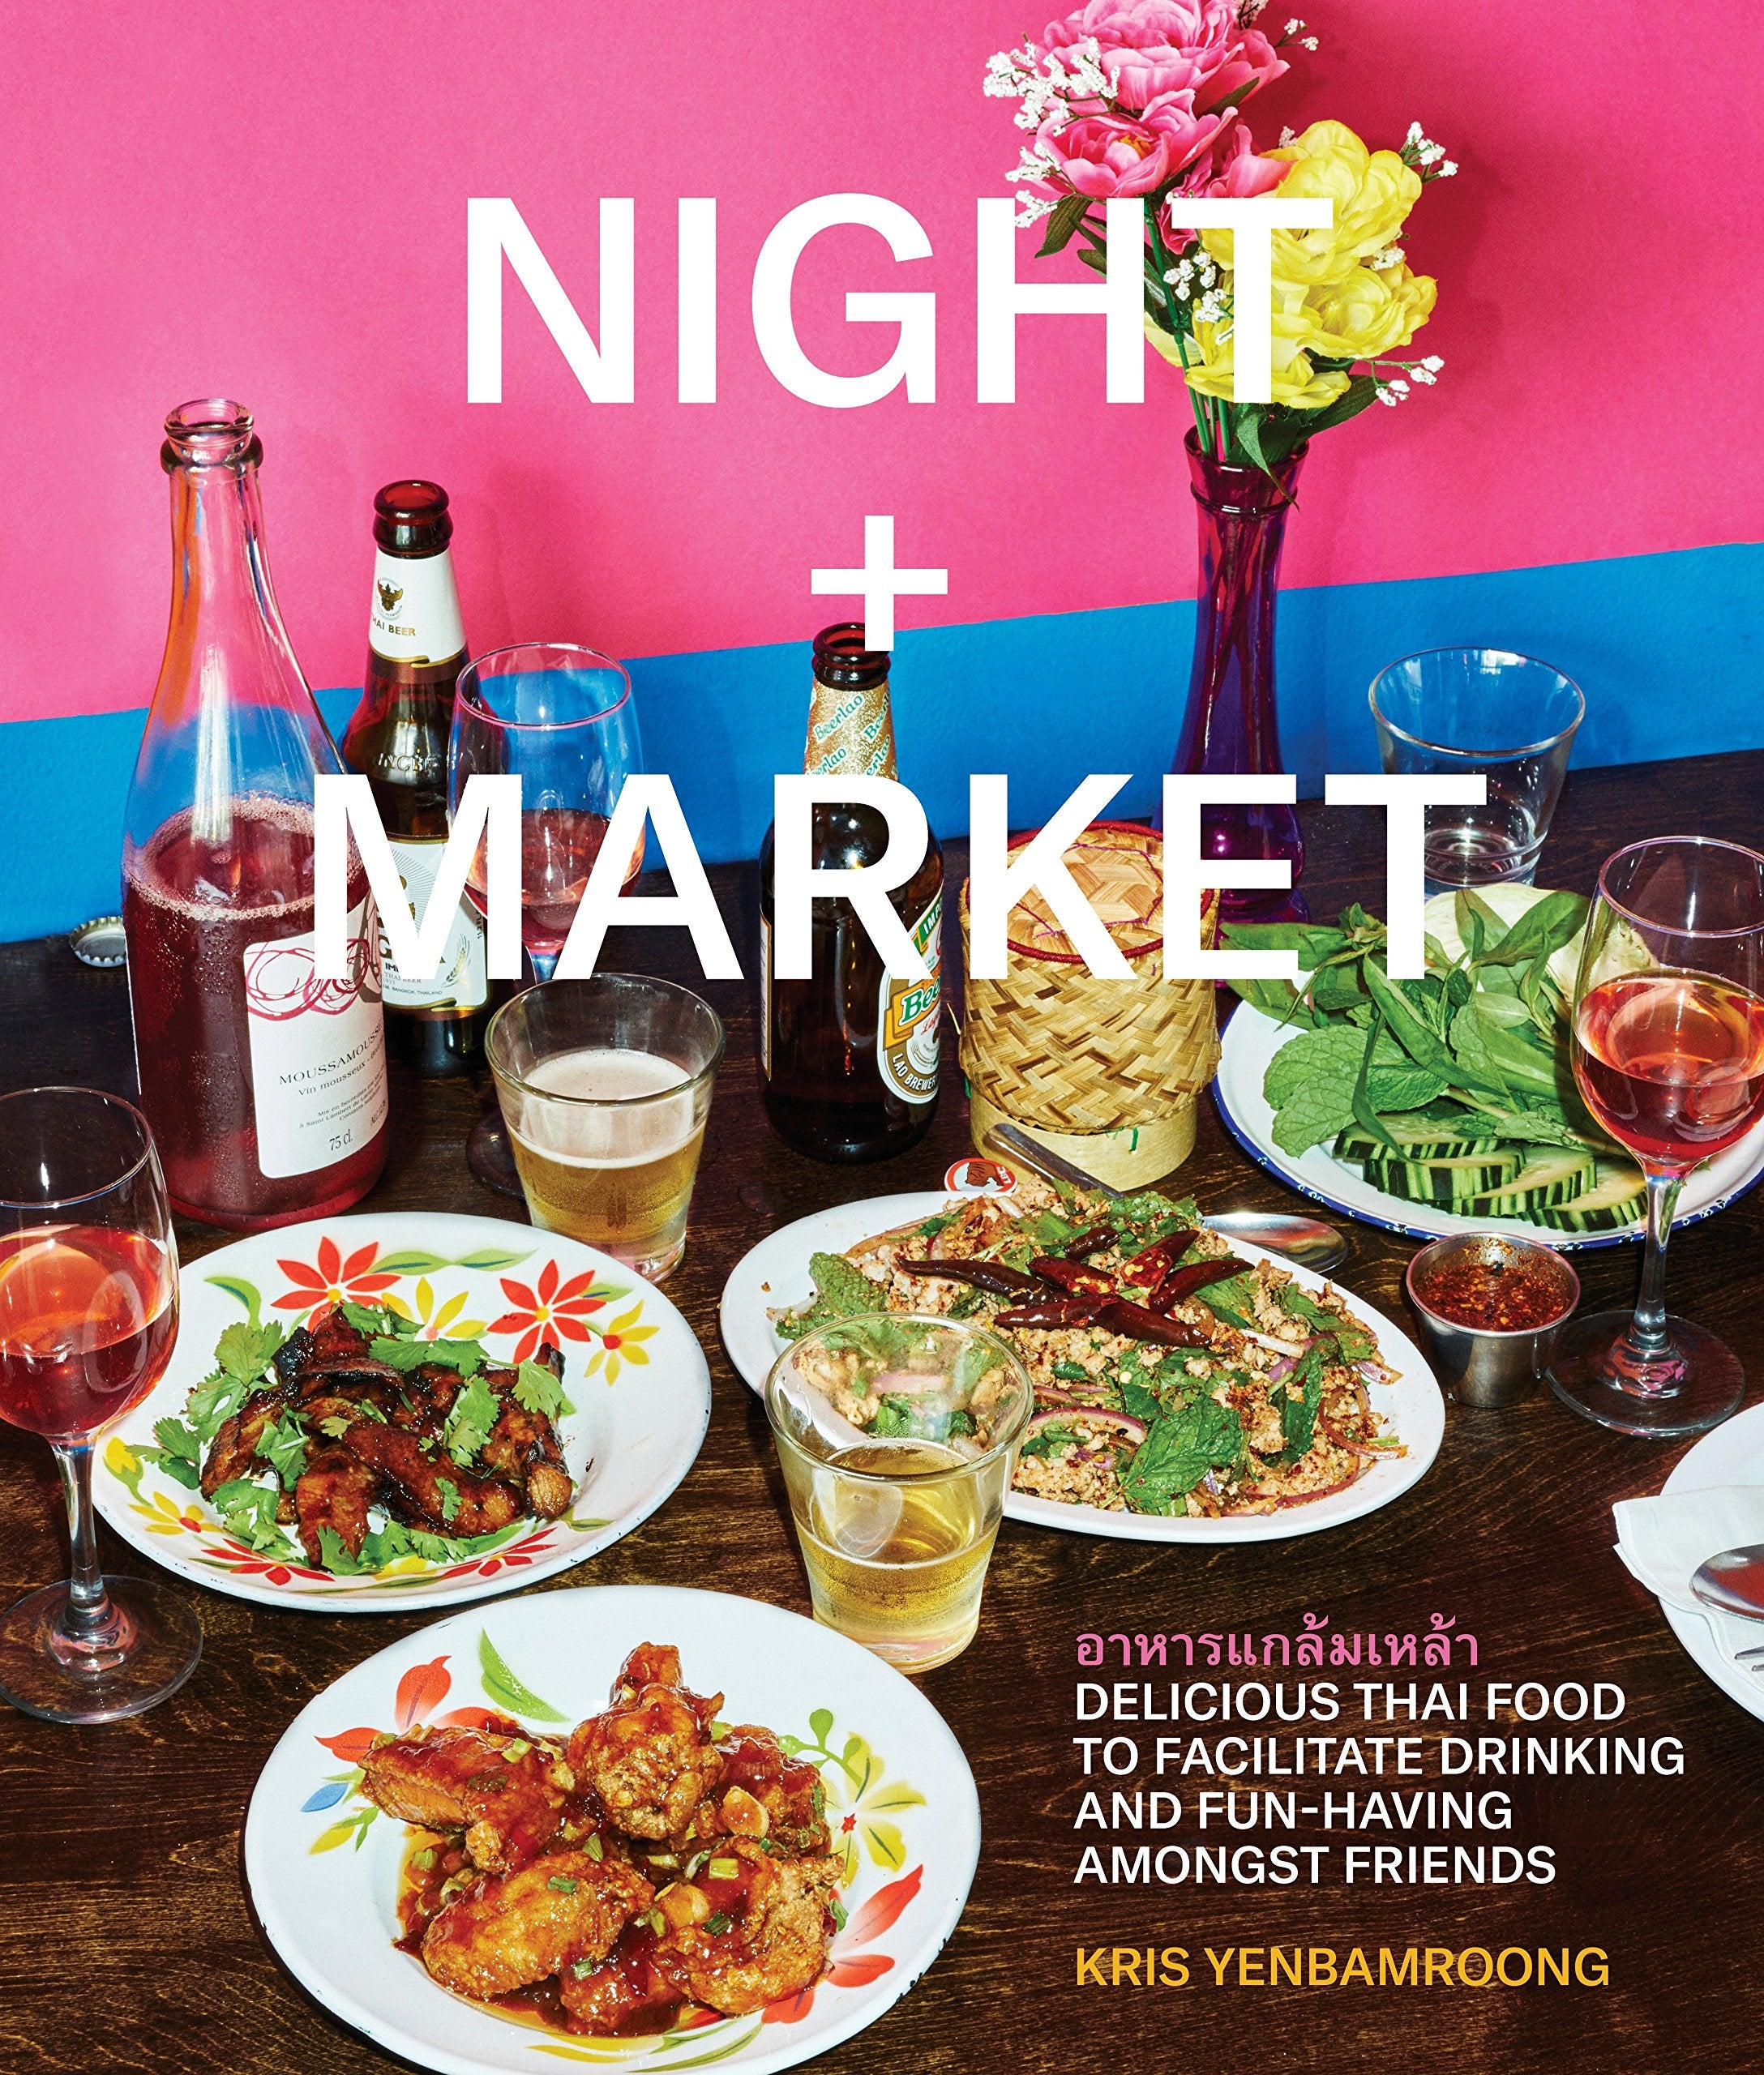 Night + Market: Delicious Thai Food to Facilitate Drinking and Fun-Having Amongst Friends (Kris Yenbamroong)